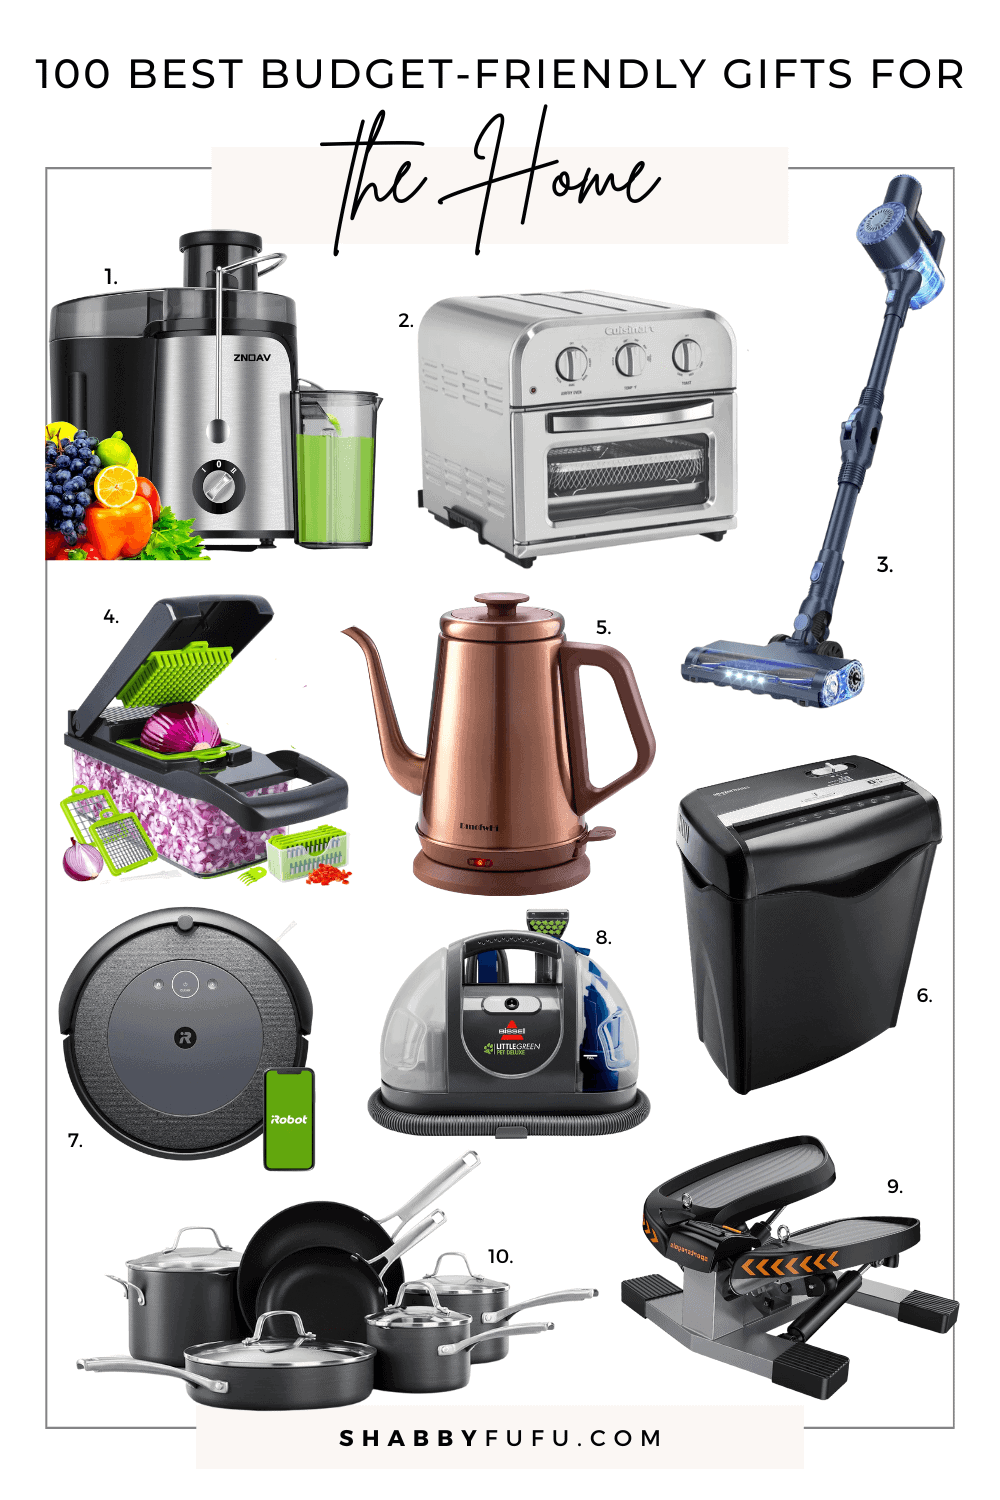 Collage image featuring different products titled "100 Best Budget Friendly Holiday Gifts For the Home"